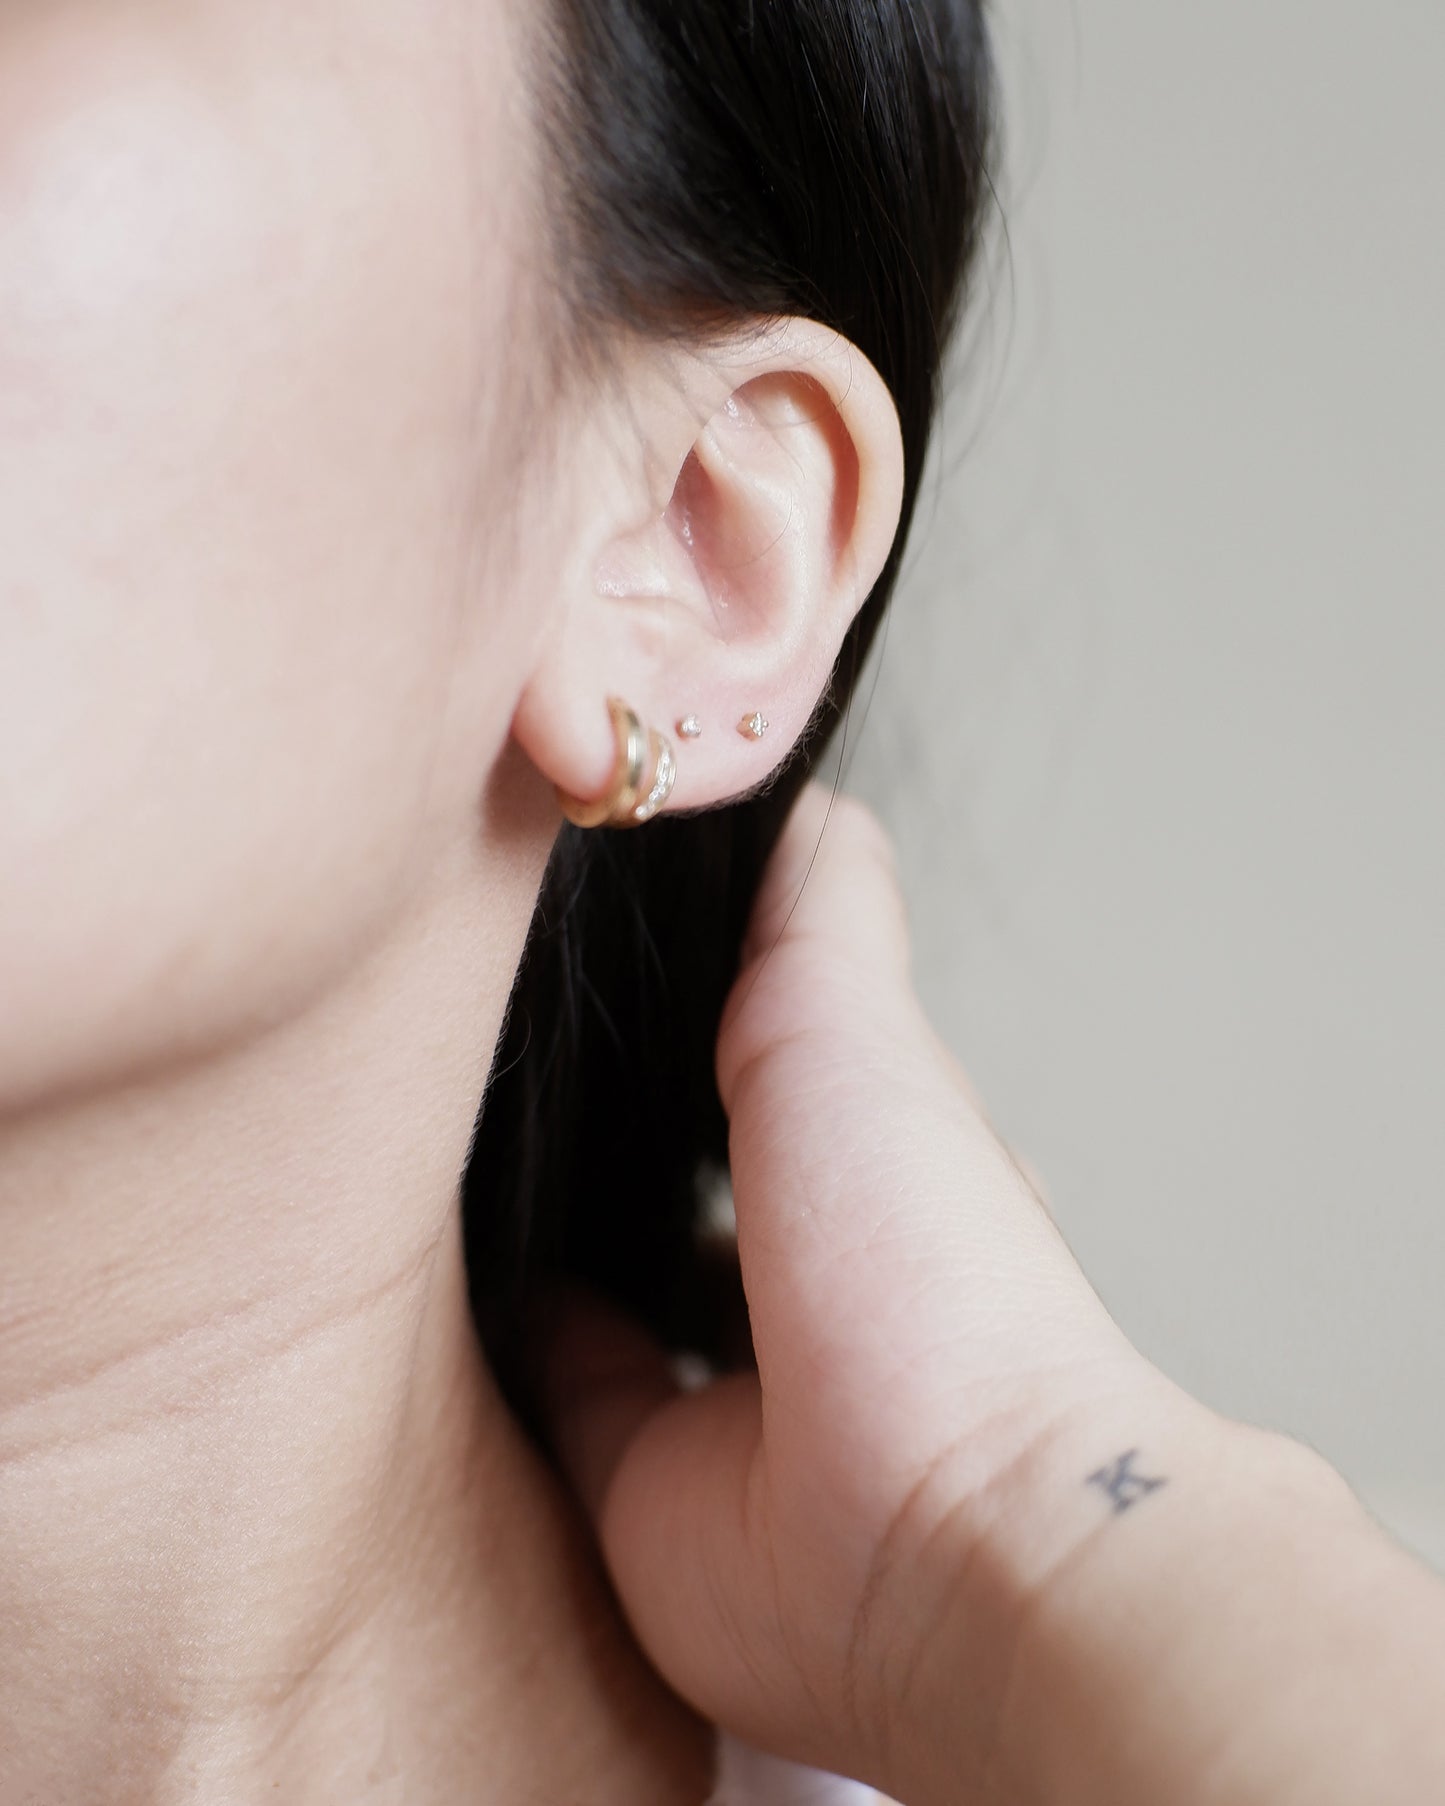 The Tiny Diamond Flat Back Threaded Studs in Solid Gold